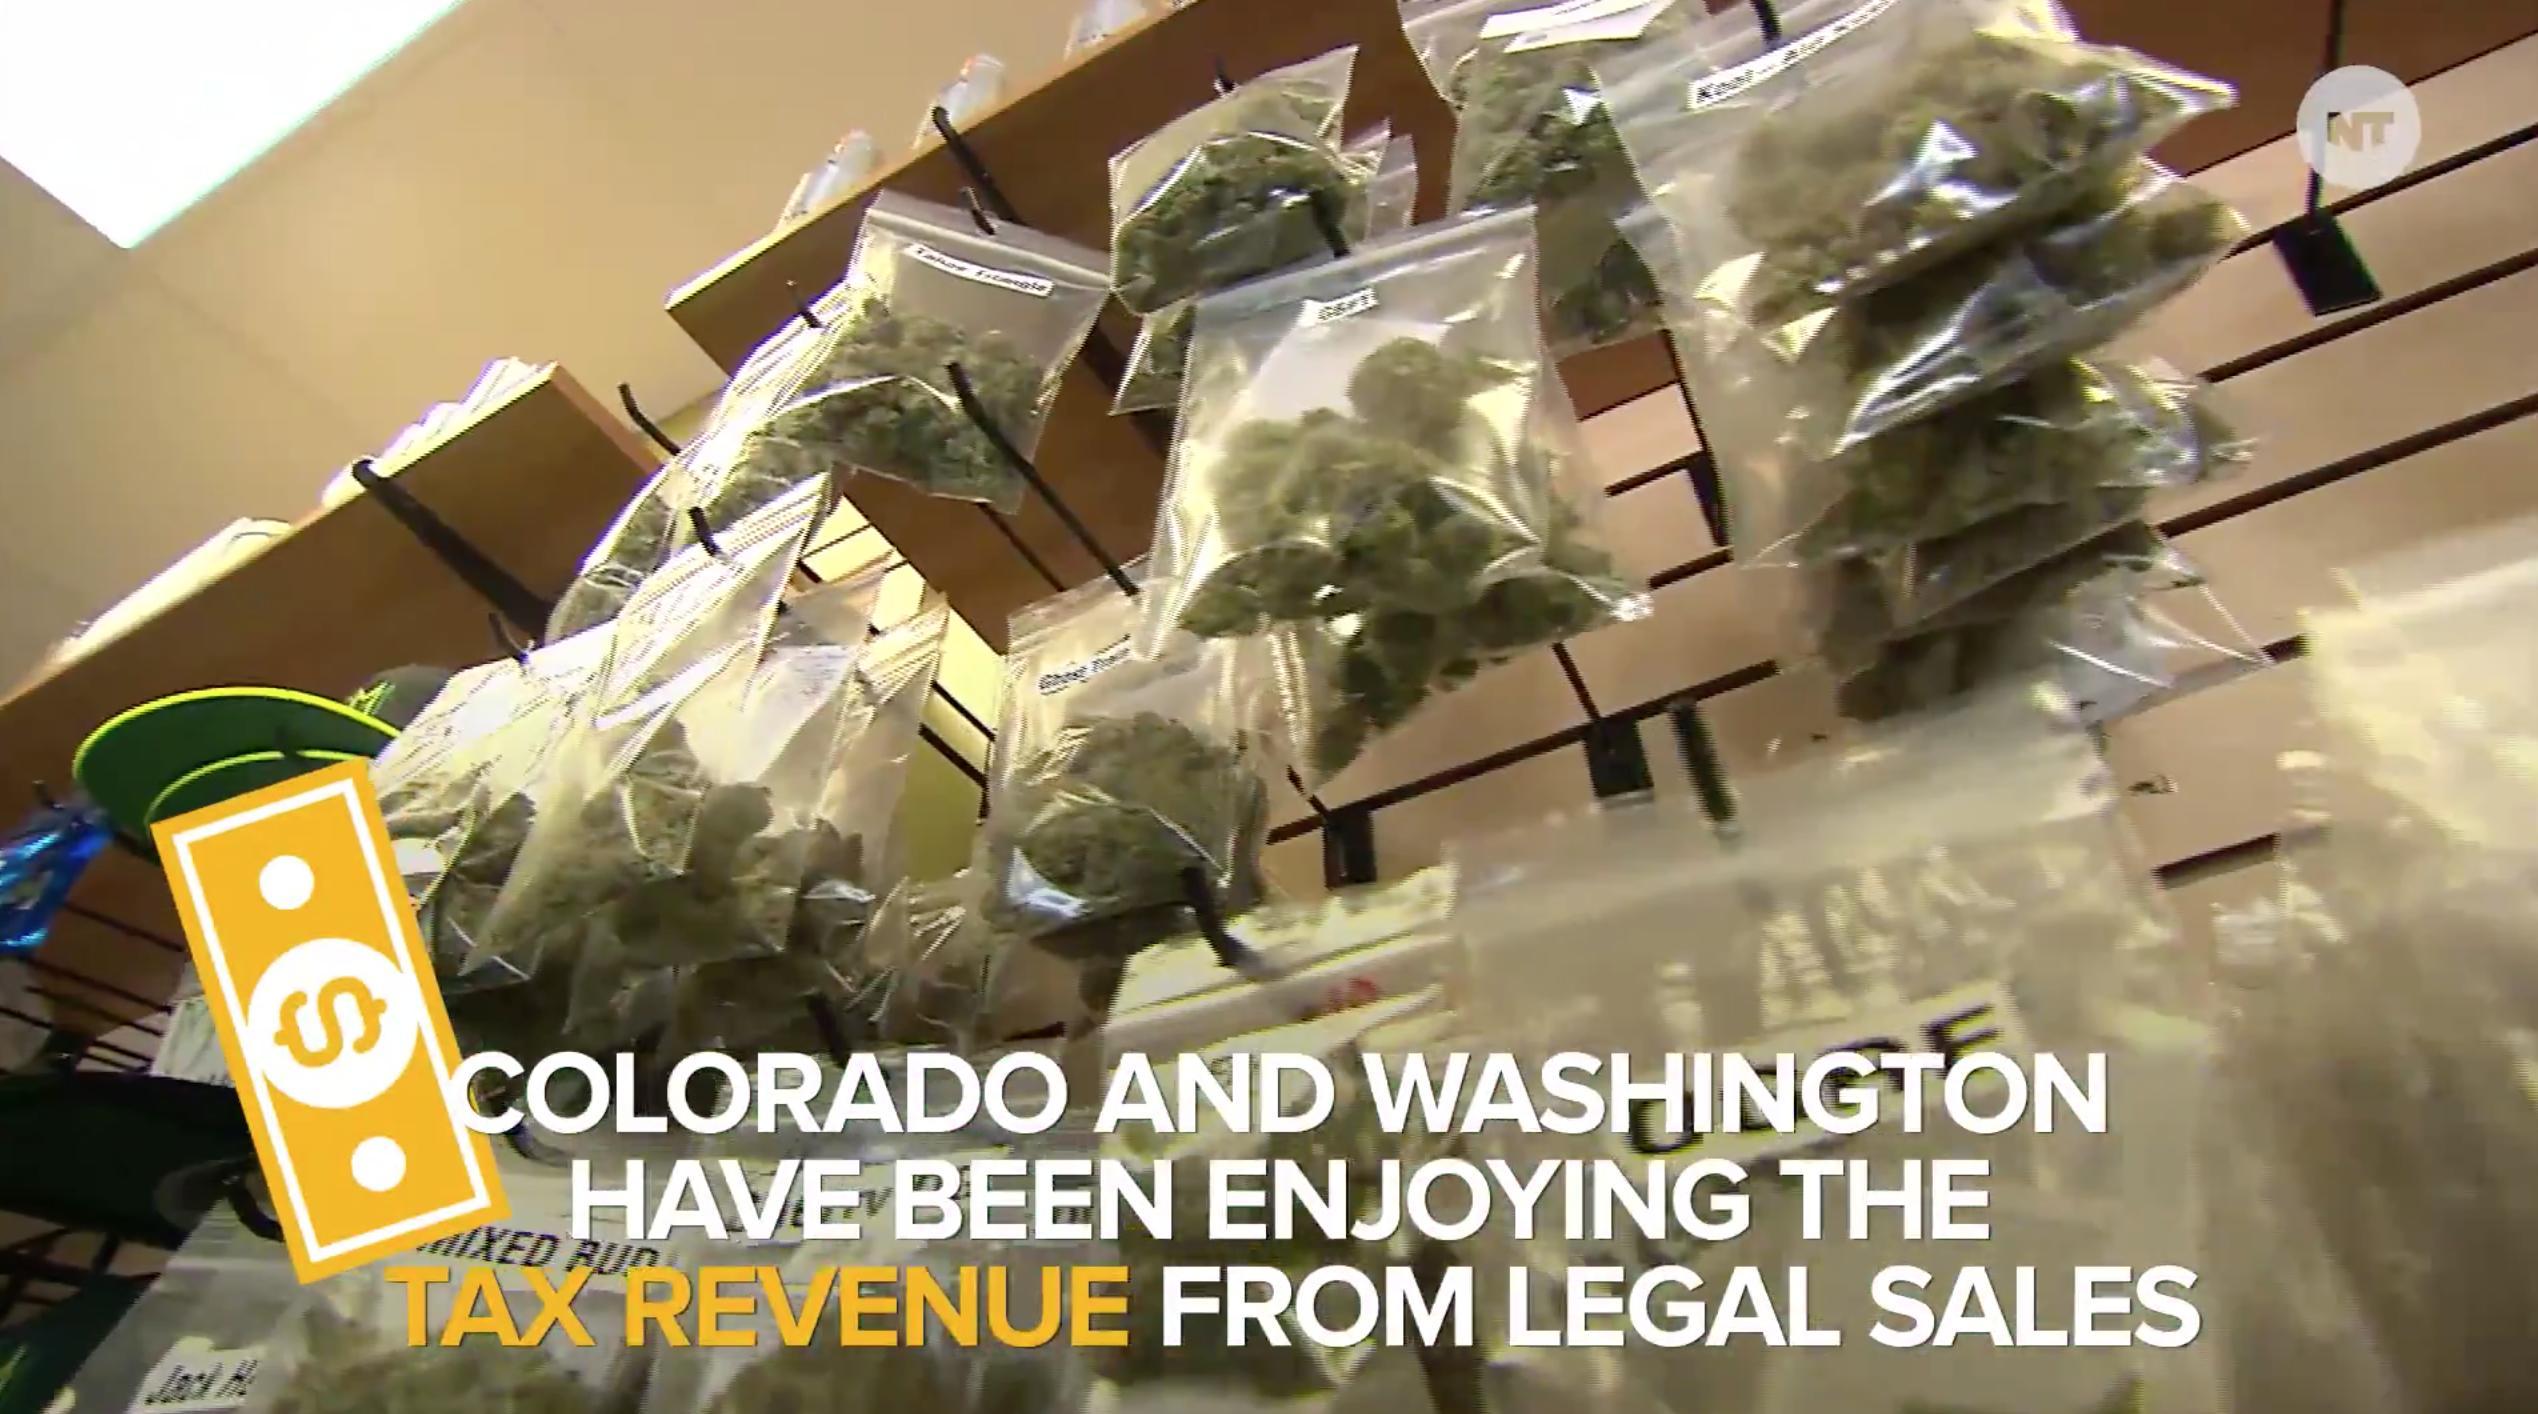 WATCH: This Is The Current State Of Marijuana Legalization In The U.S.